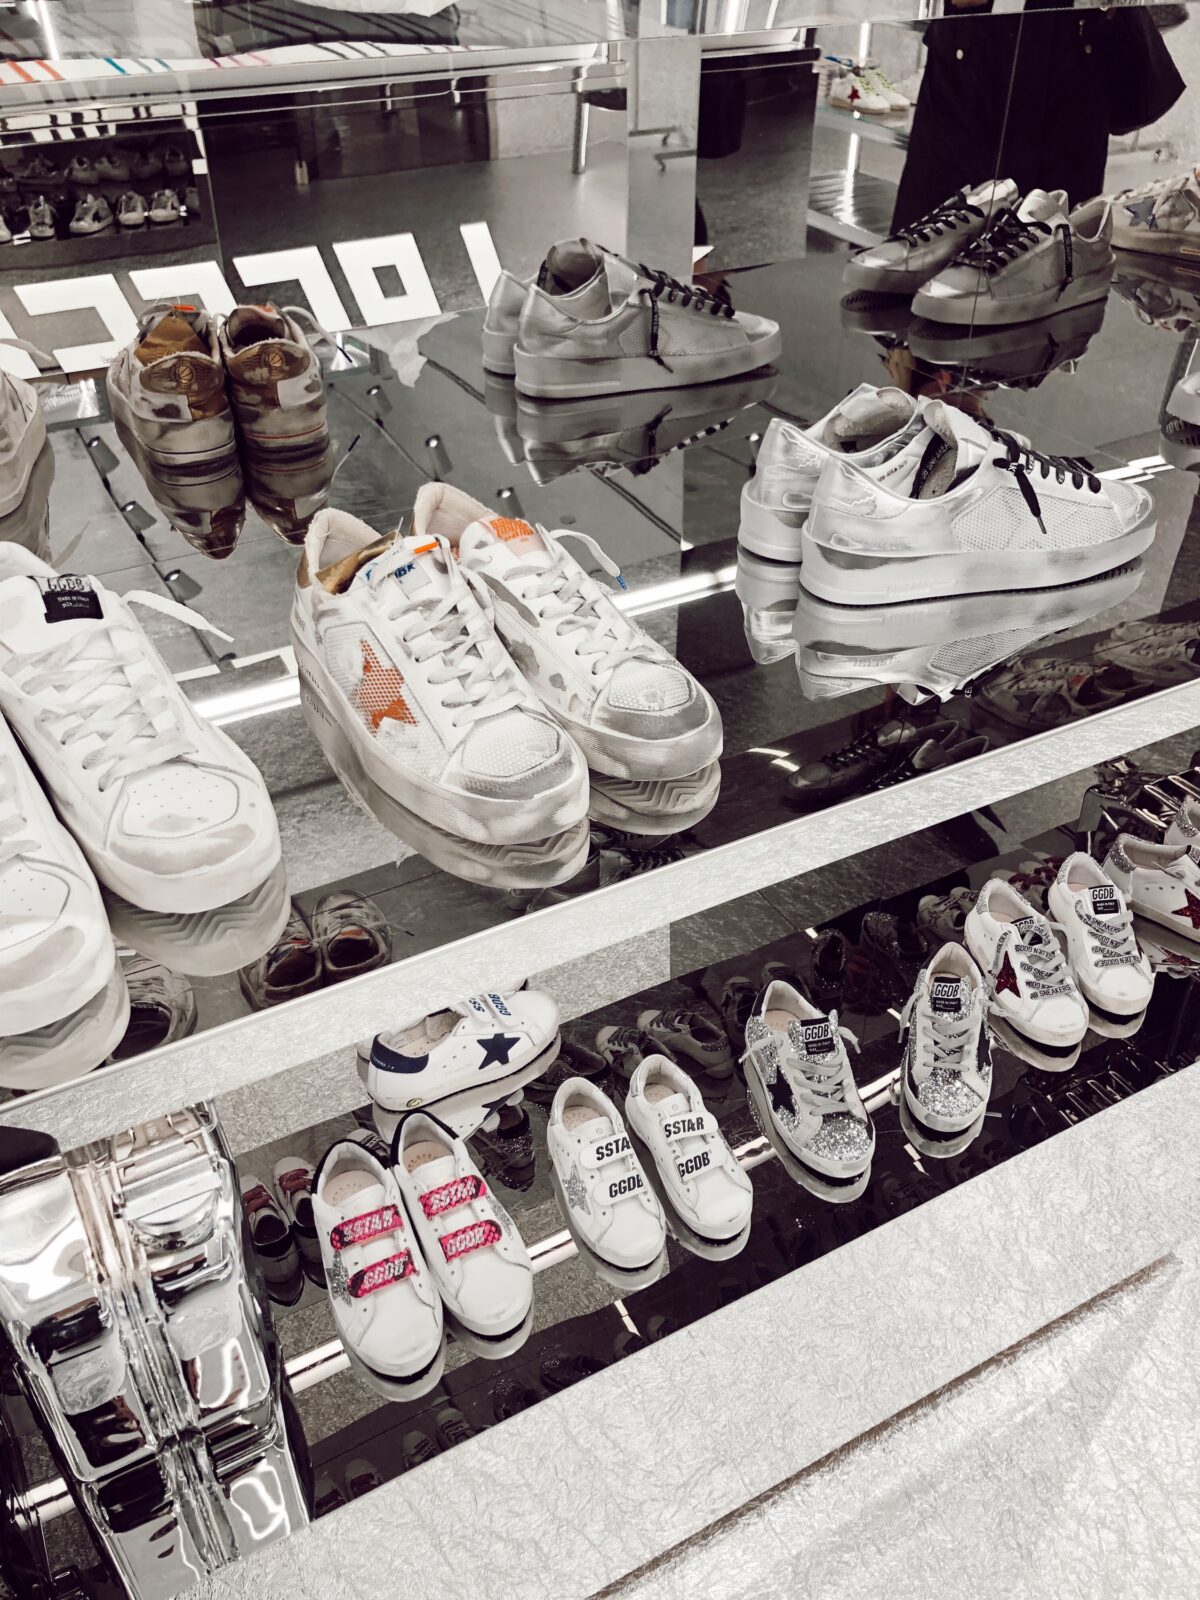 St 鍔 Korea Golden Goose Store Laces up at NorthPark Center – SMU Look